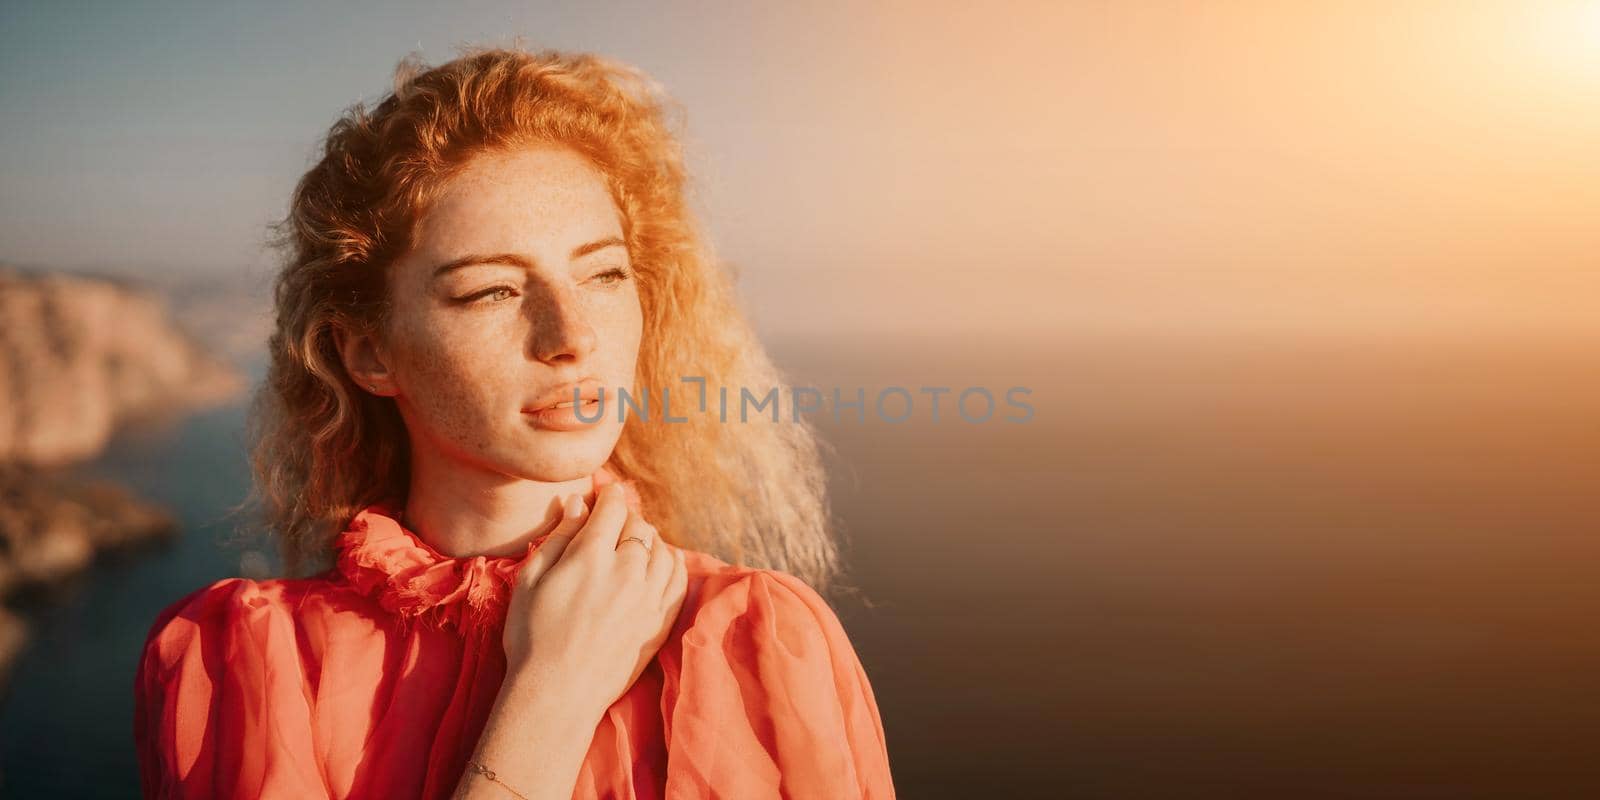 Close up portrait of curly redhead young caucasian woman with freckles looking at camera and smiling. Cute woman portrait in a pink long dress posing on a volcanic rock high above the sea at sunset by panophotograph